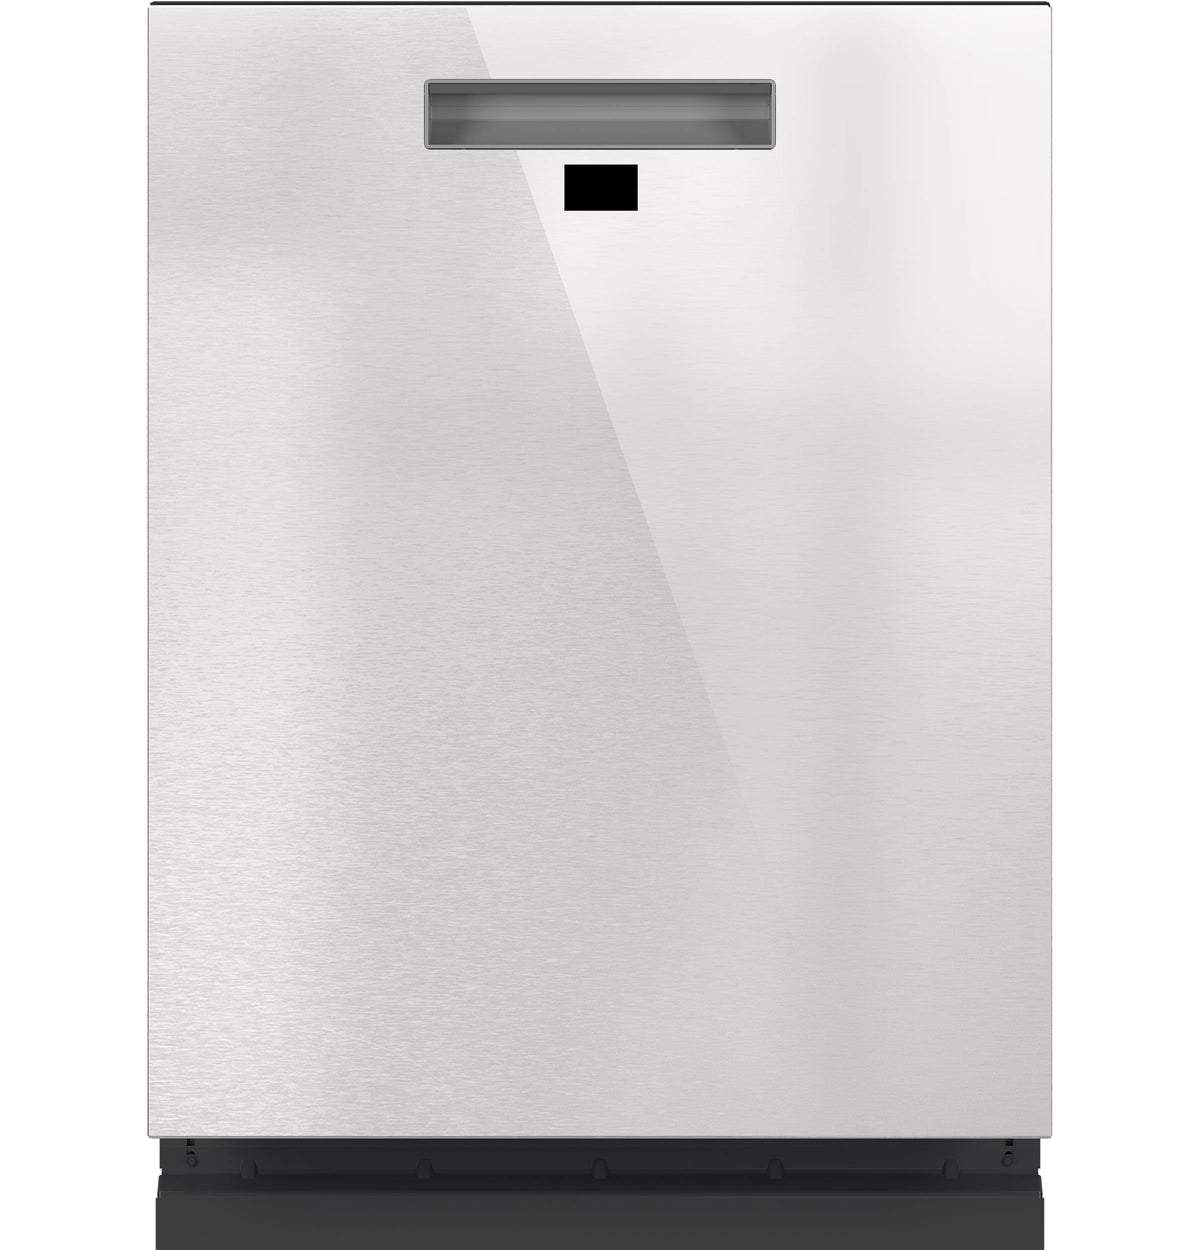 GE® ENERGY STAR® Stainless Steel Interior Dishwasher with Front